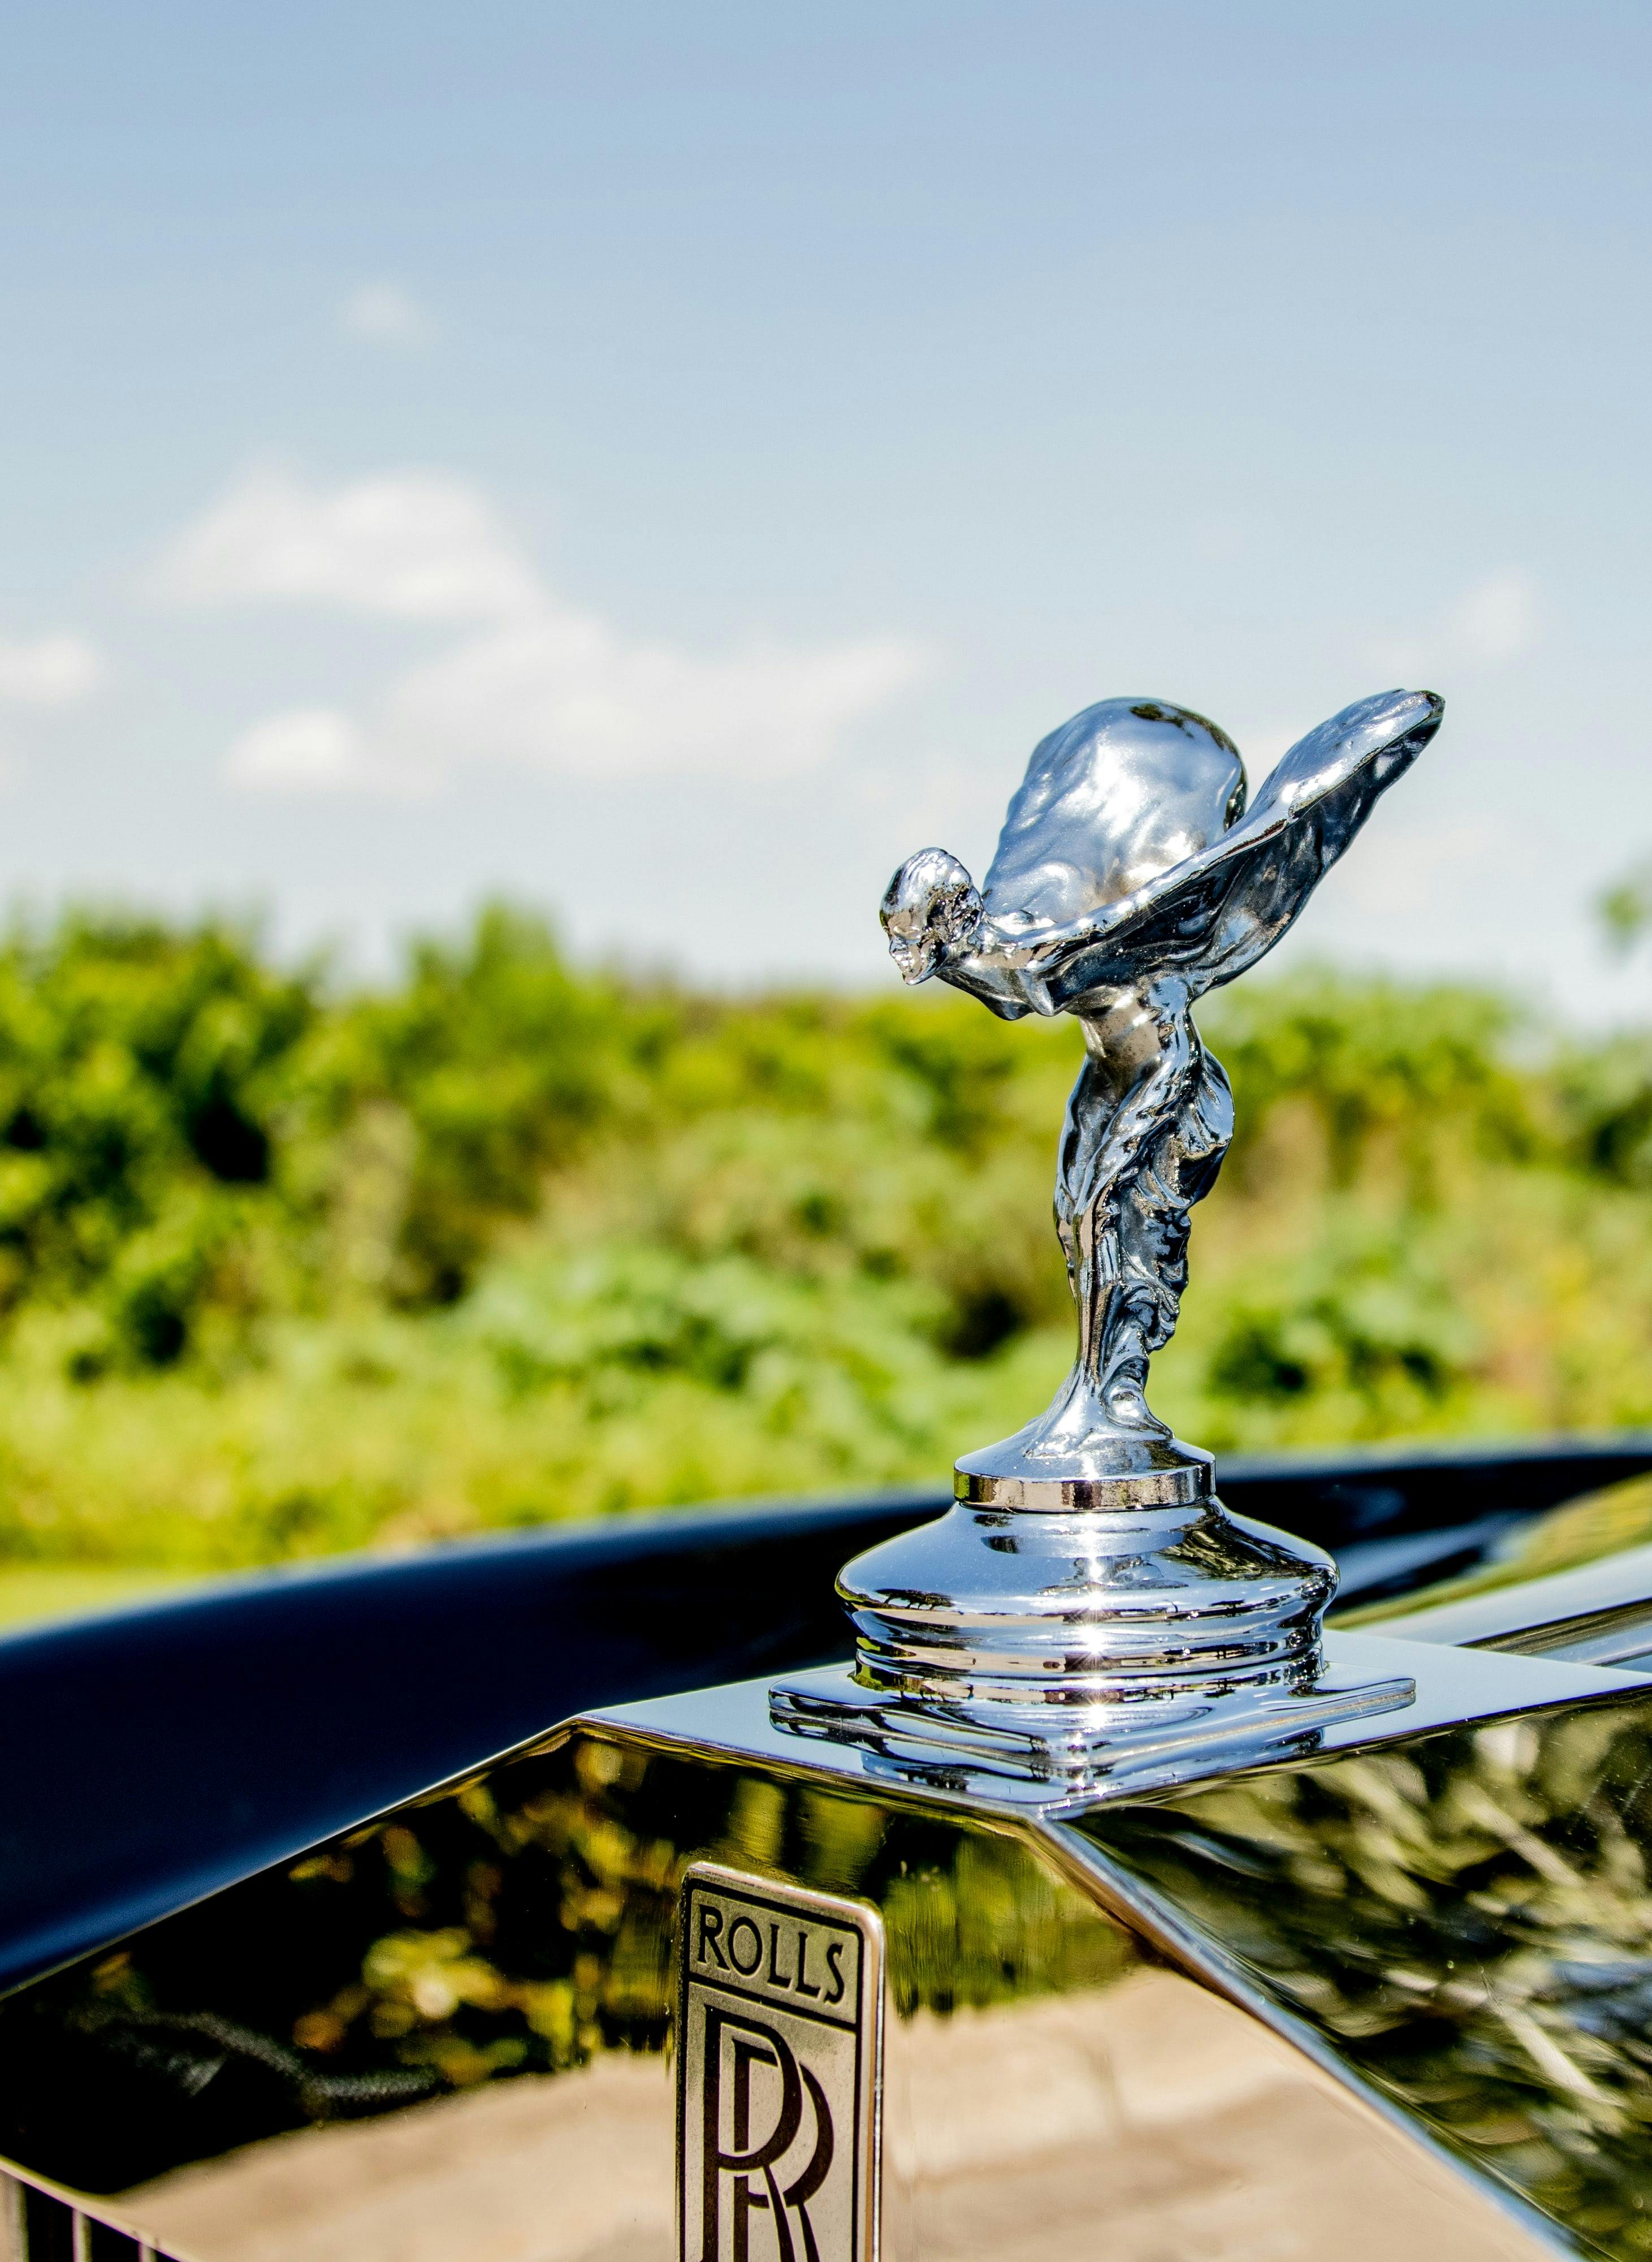 Rolls Royce Photos Download Free Rolls Royce Stock Photos Hd Images